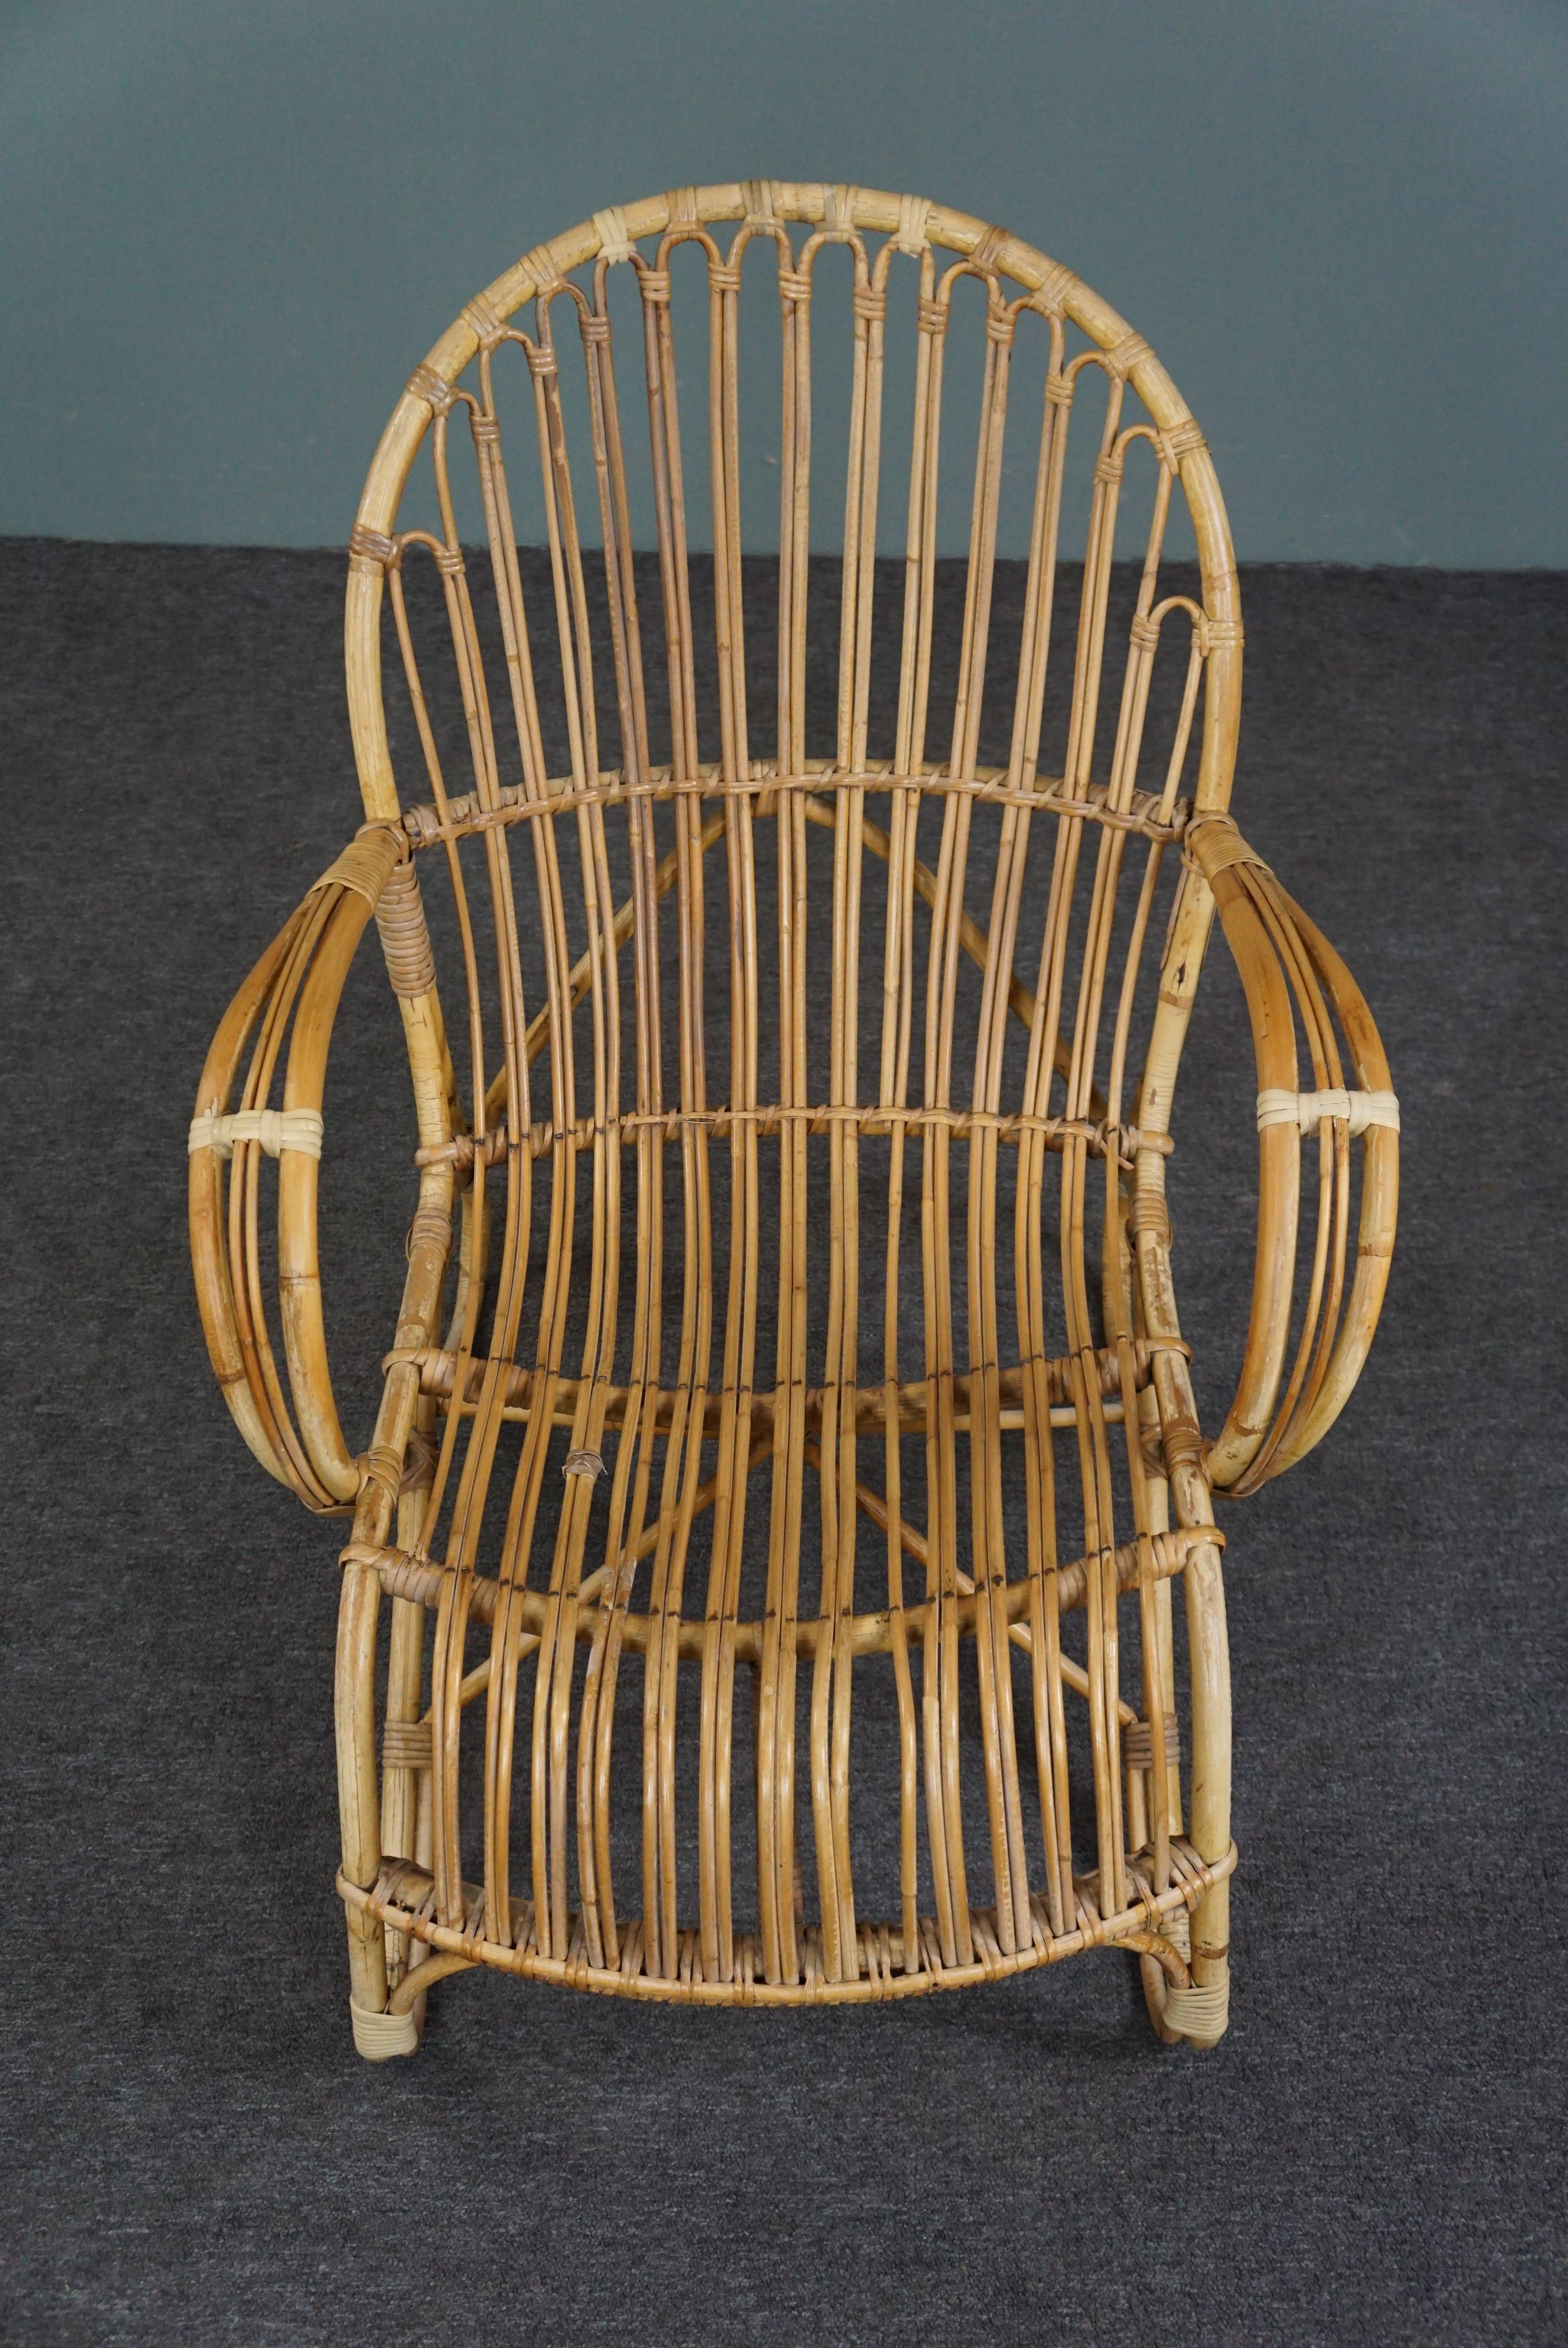 Offered is this beautiful patinated rattan armchair made in the 1950s in the Netherlands.

This sturdy aged rattan armchair has a beautiful subtle design and beautiful round details. The open character of this chair also gives a spacious effect to